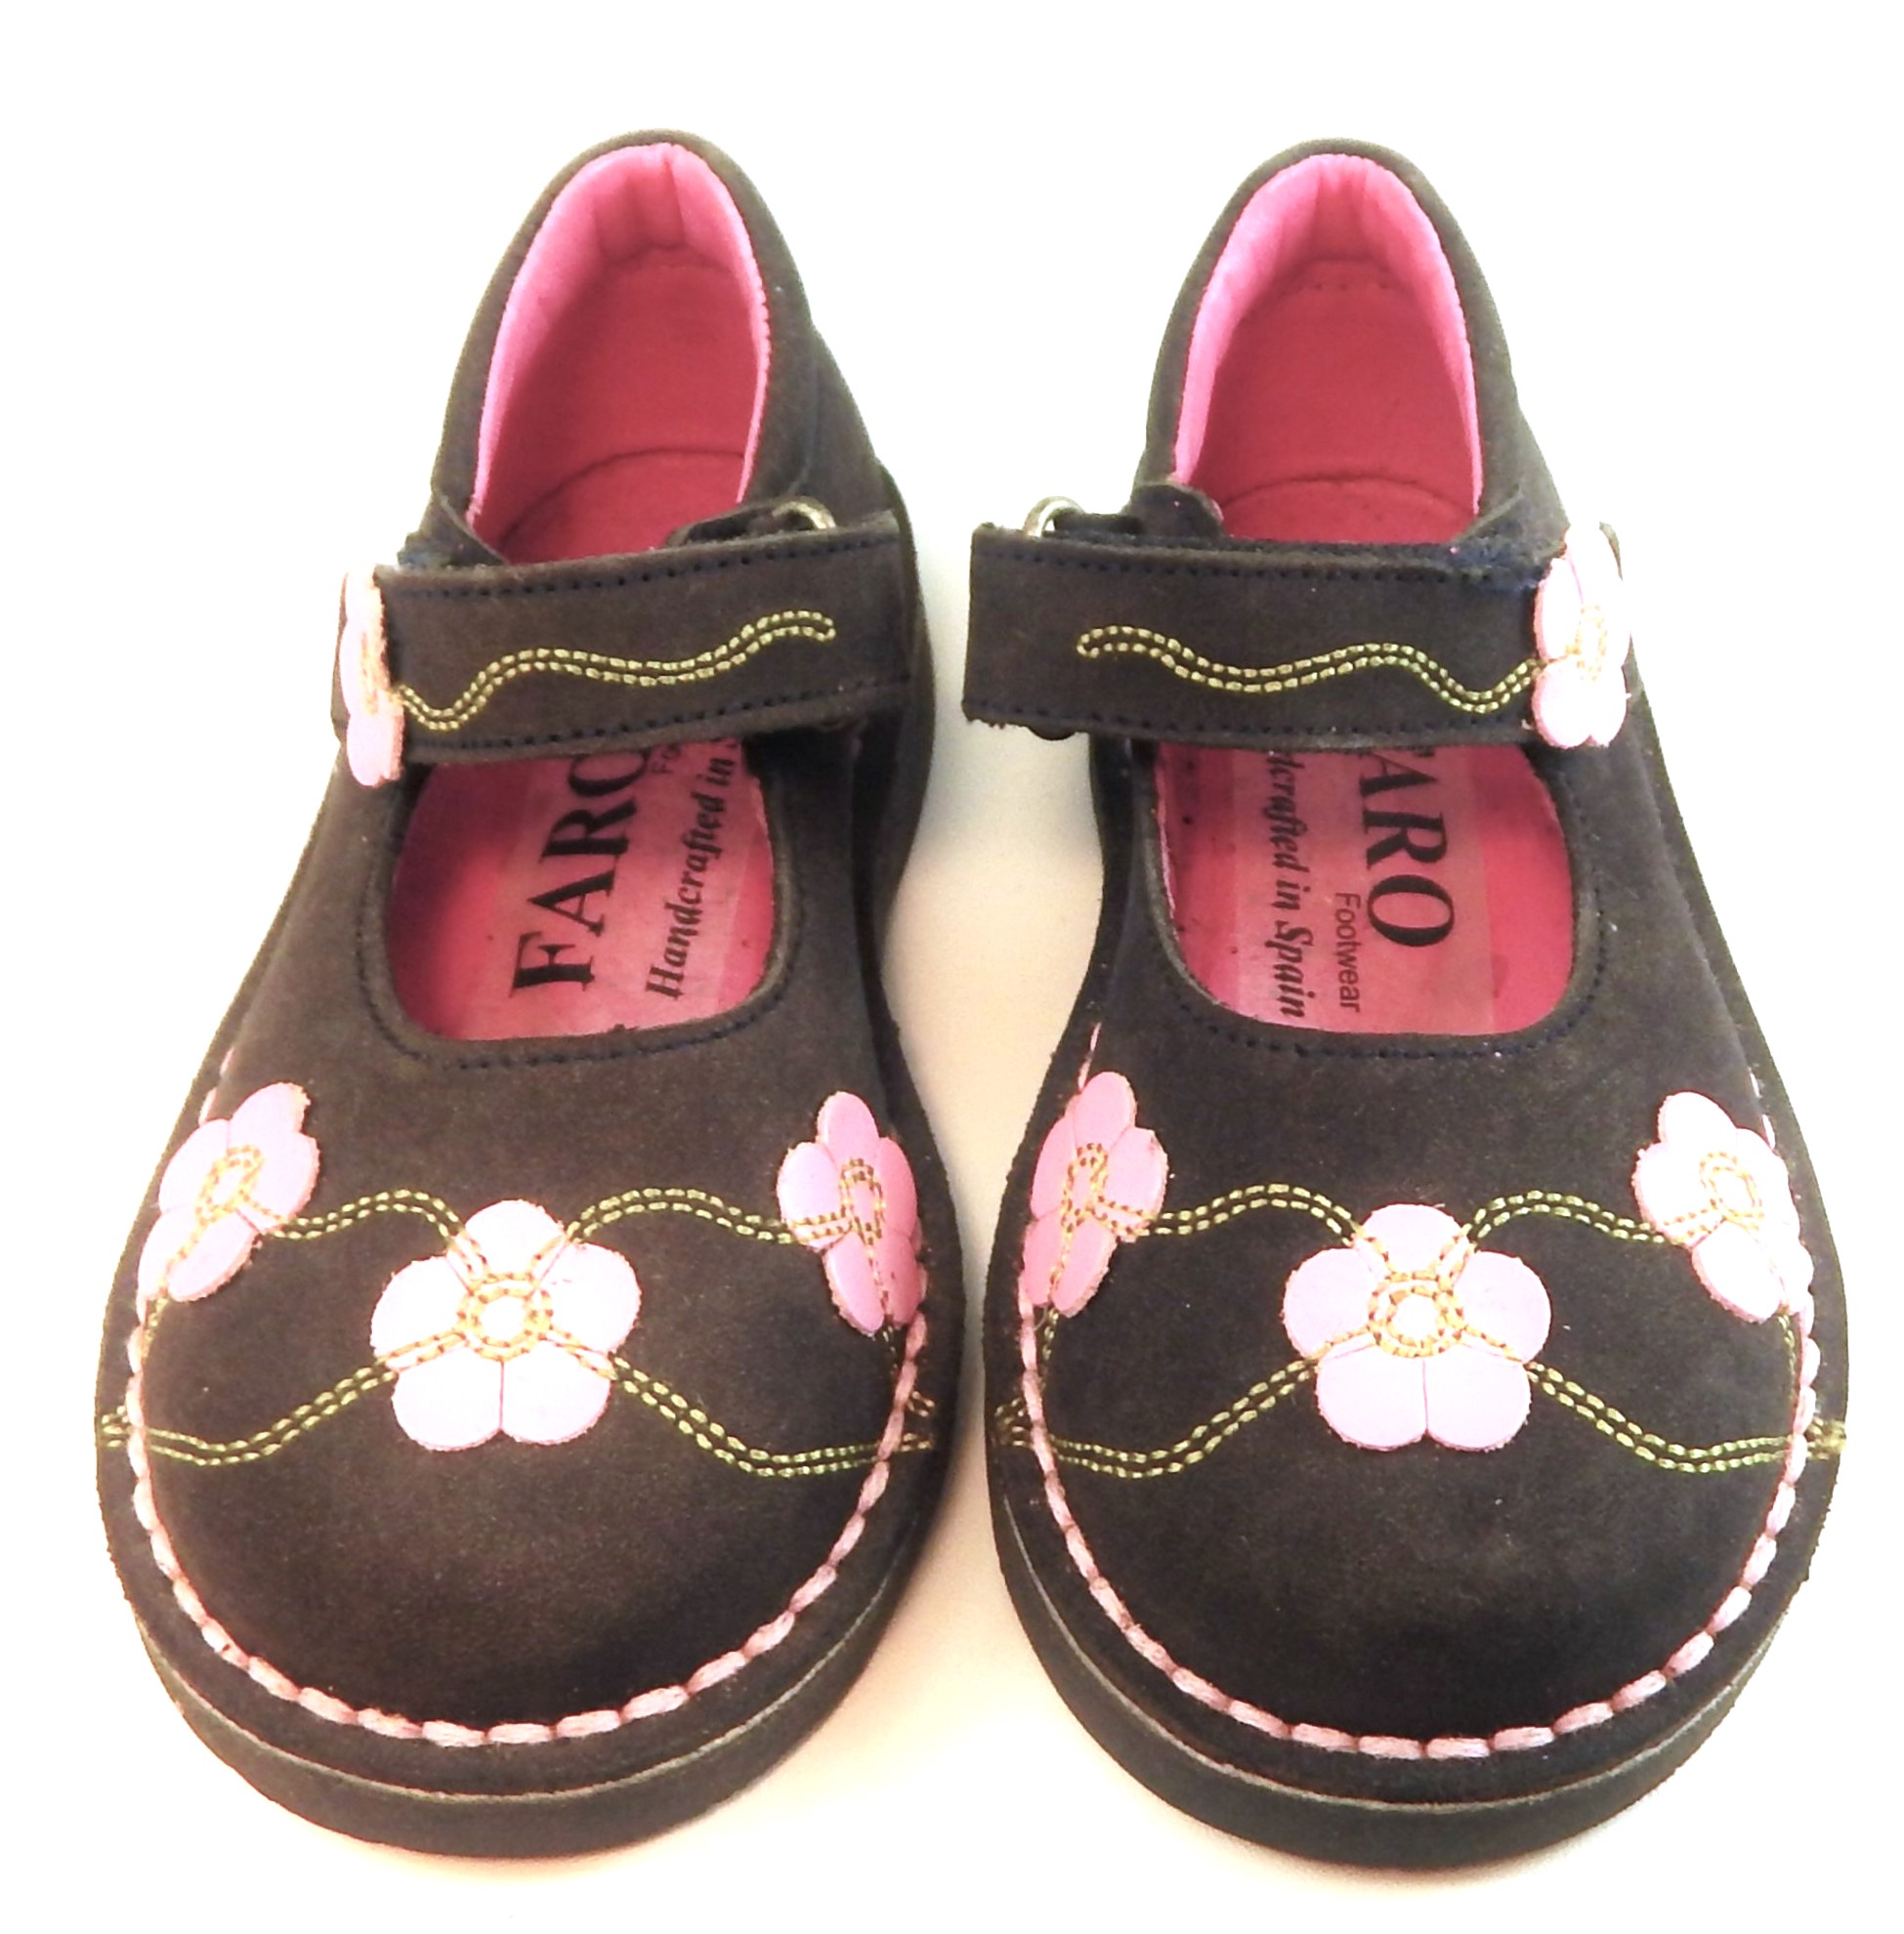 FARO 5T0911 - Black & Pink Mary Janes - Euro 24 Size 7